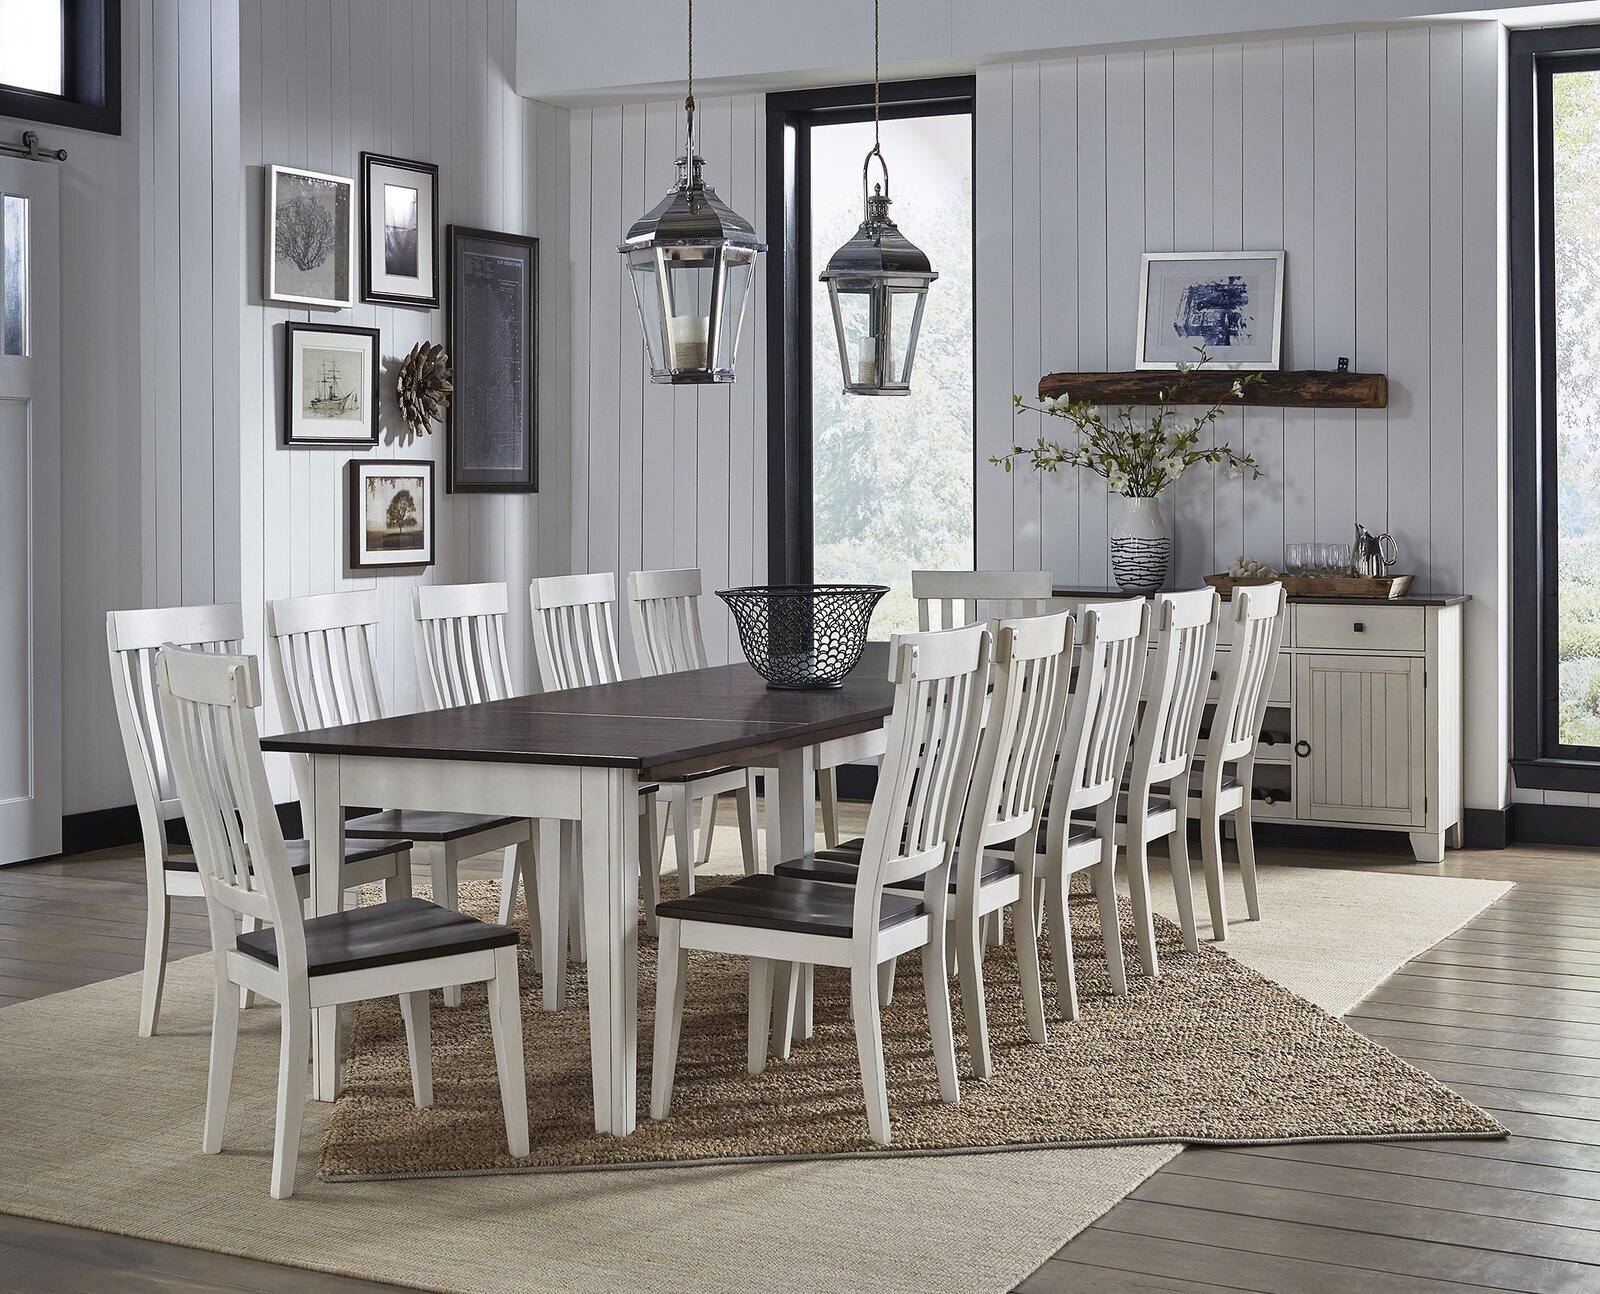 Dual Color Large Dining Table to Seat 12